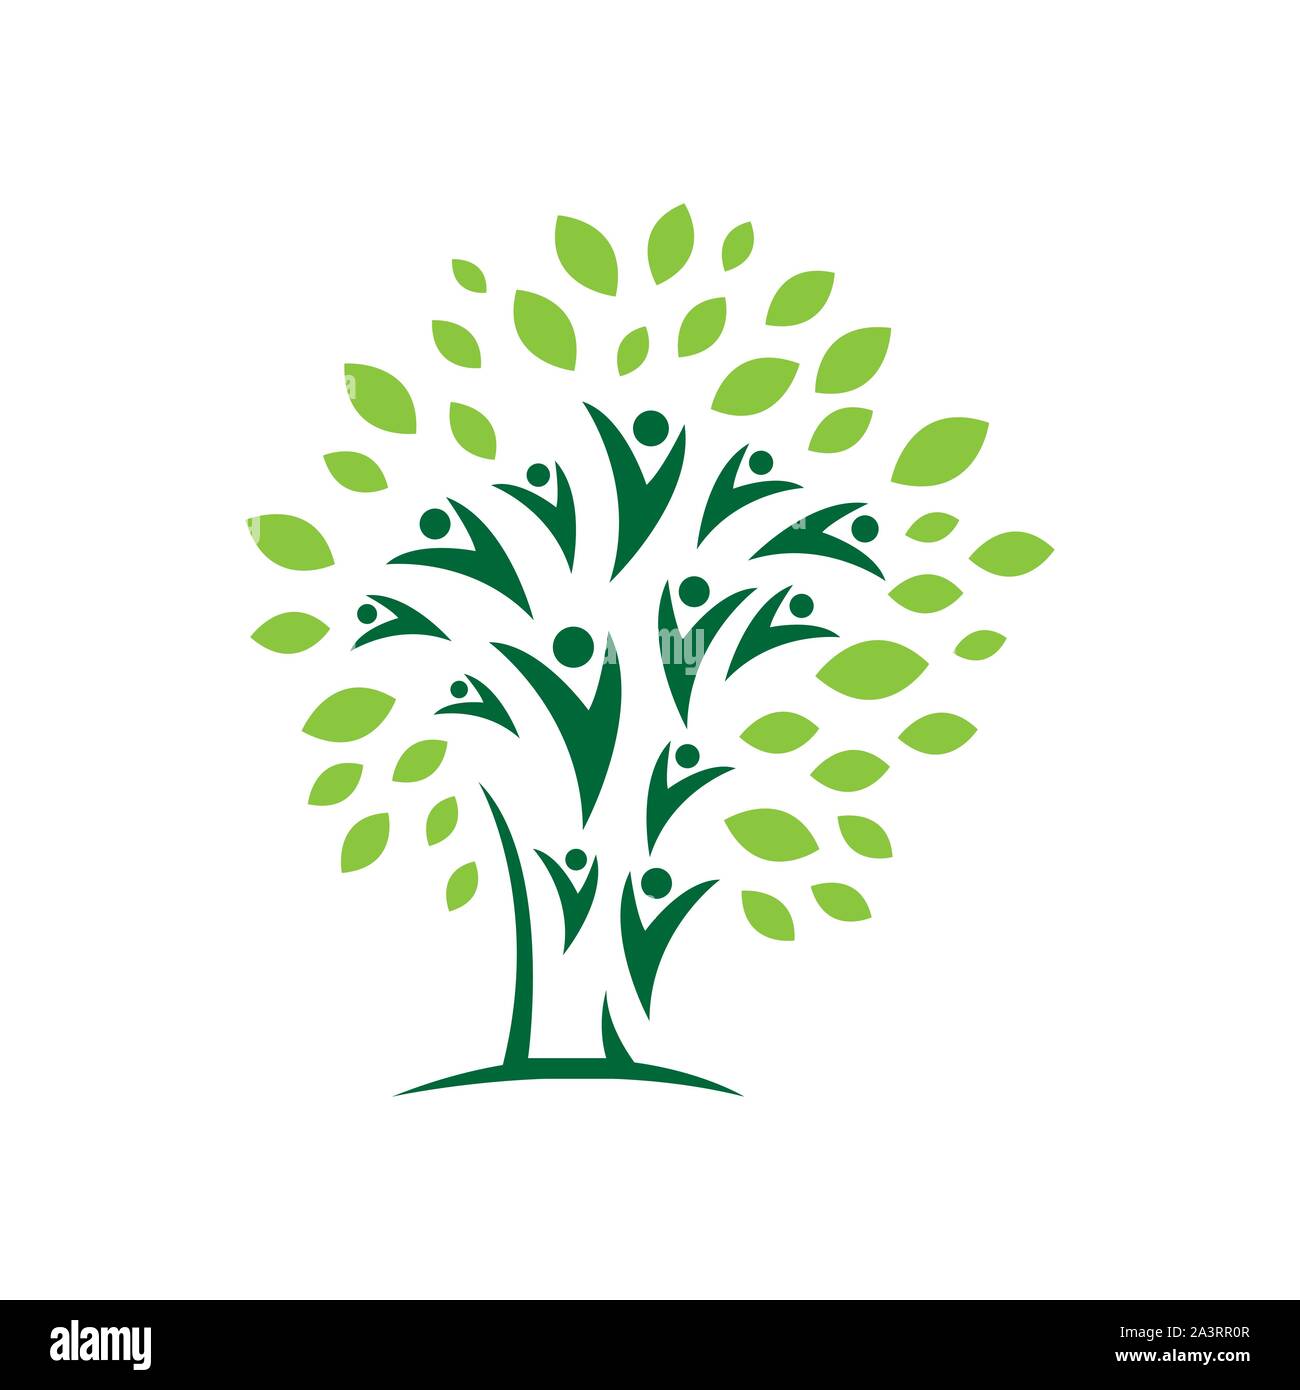 Nature Eco Community Abstract People tree Logo design vector Icon Symbol Elements Stock Vector